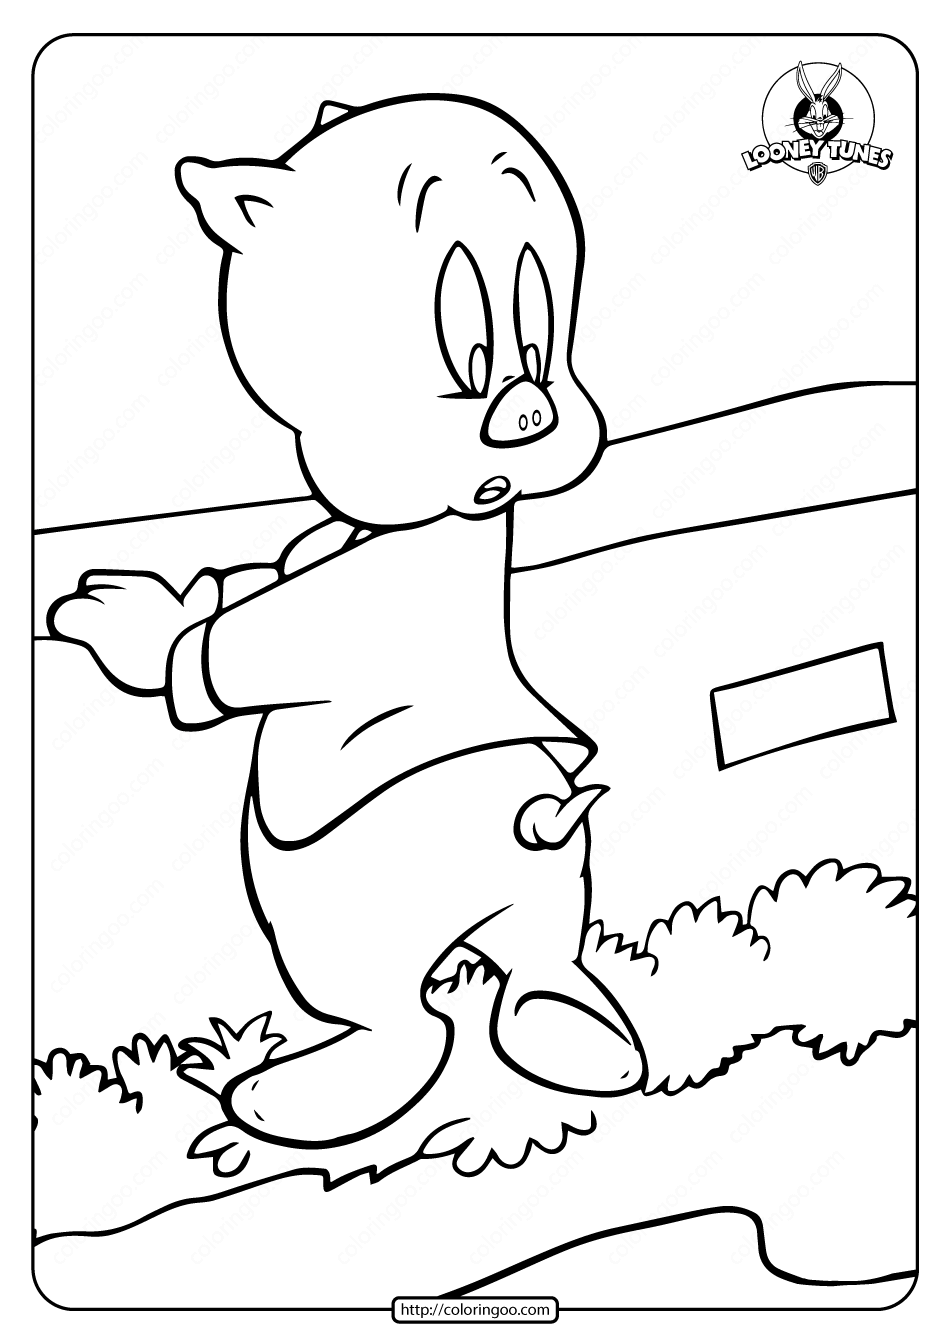 looney tunes porky pig coloring page